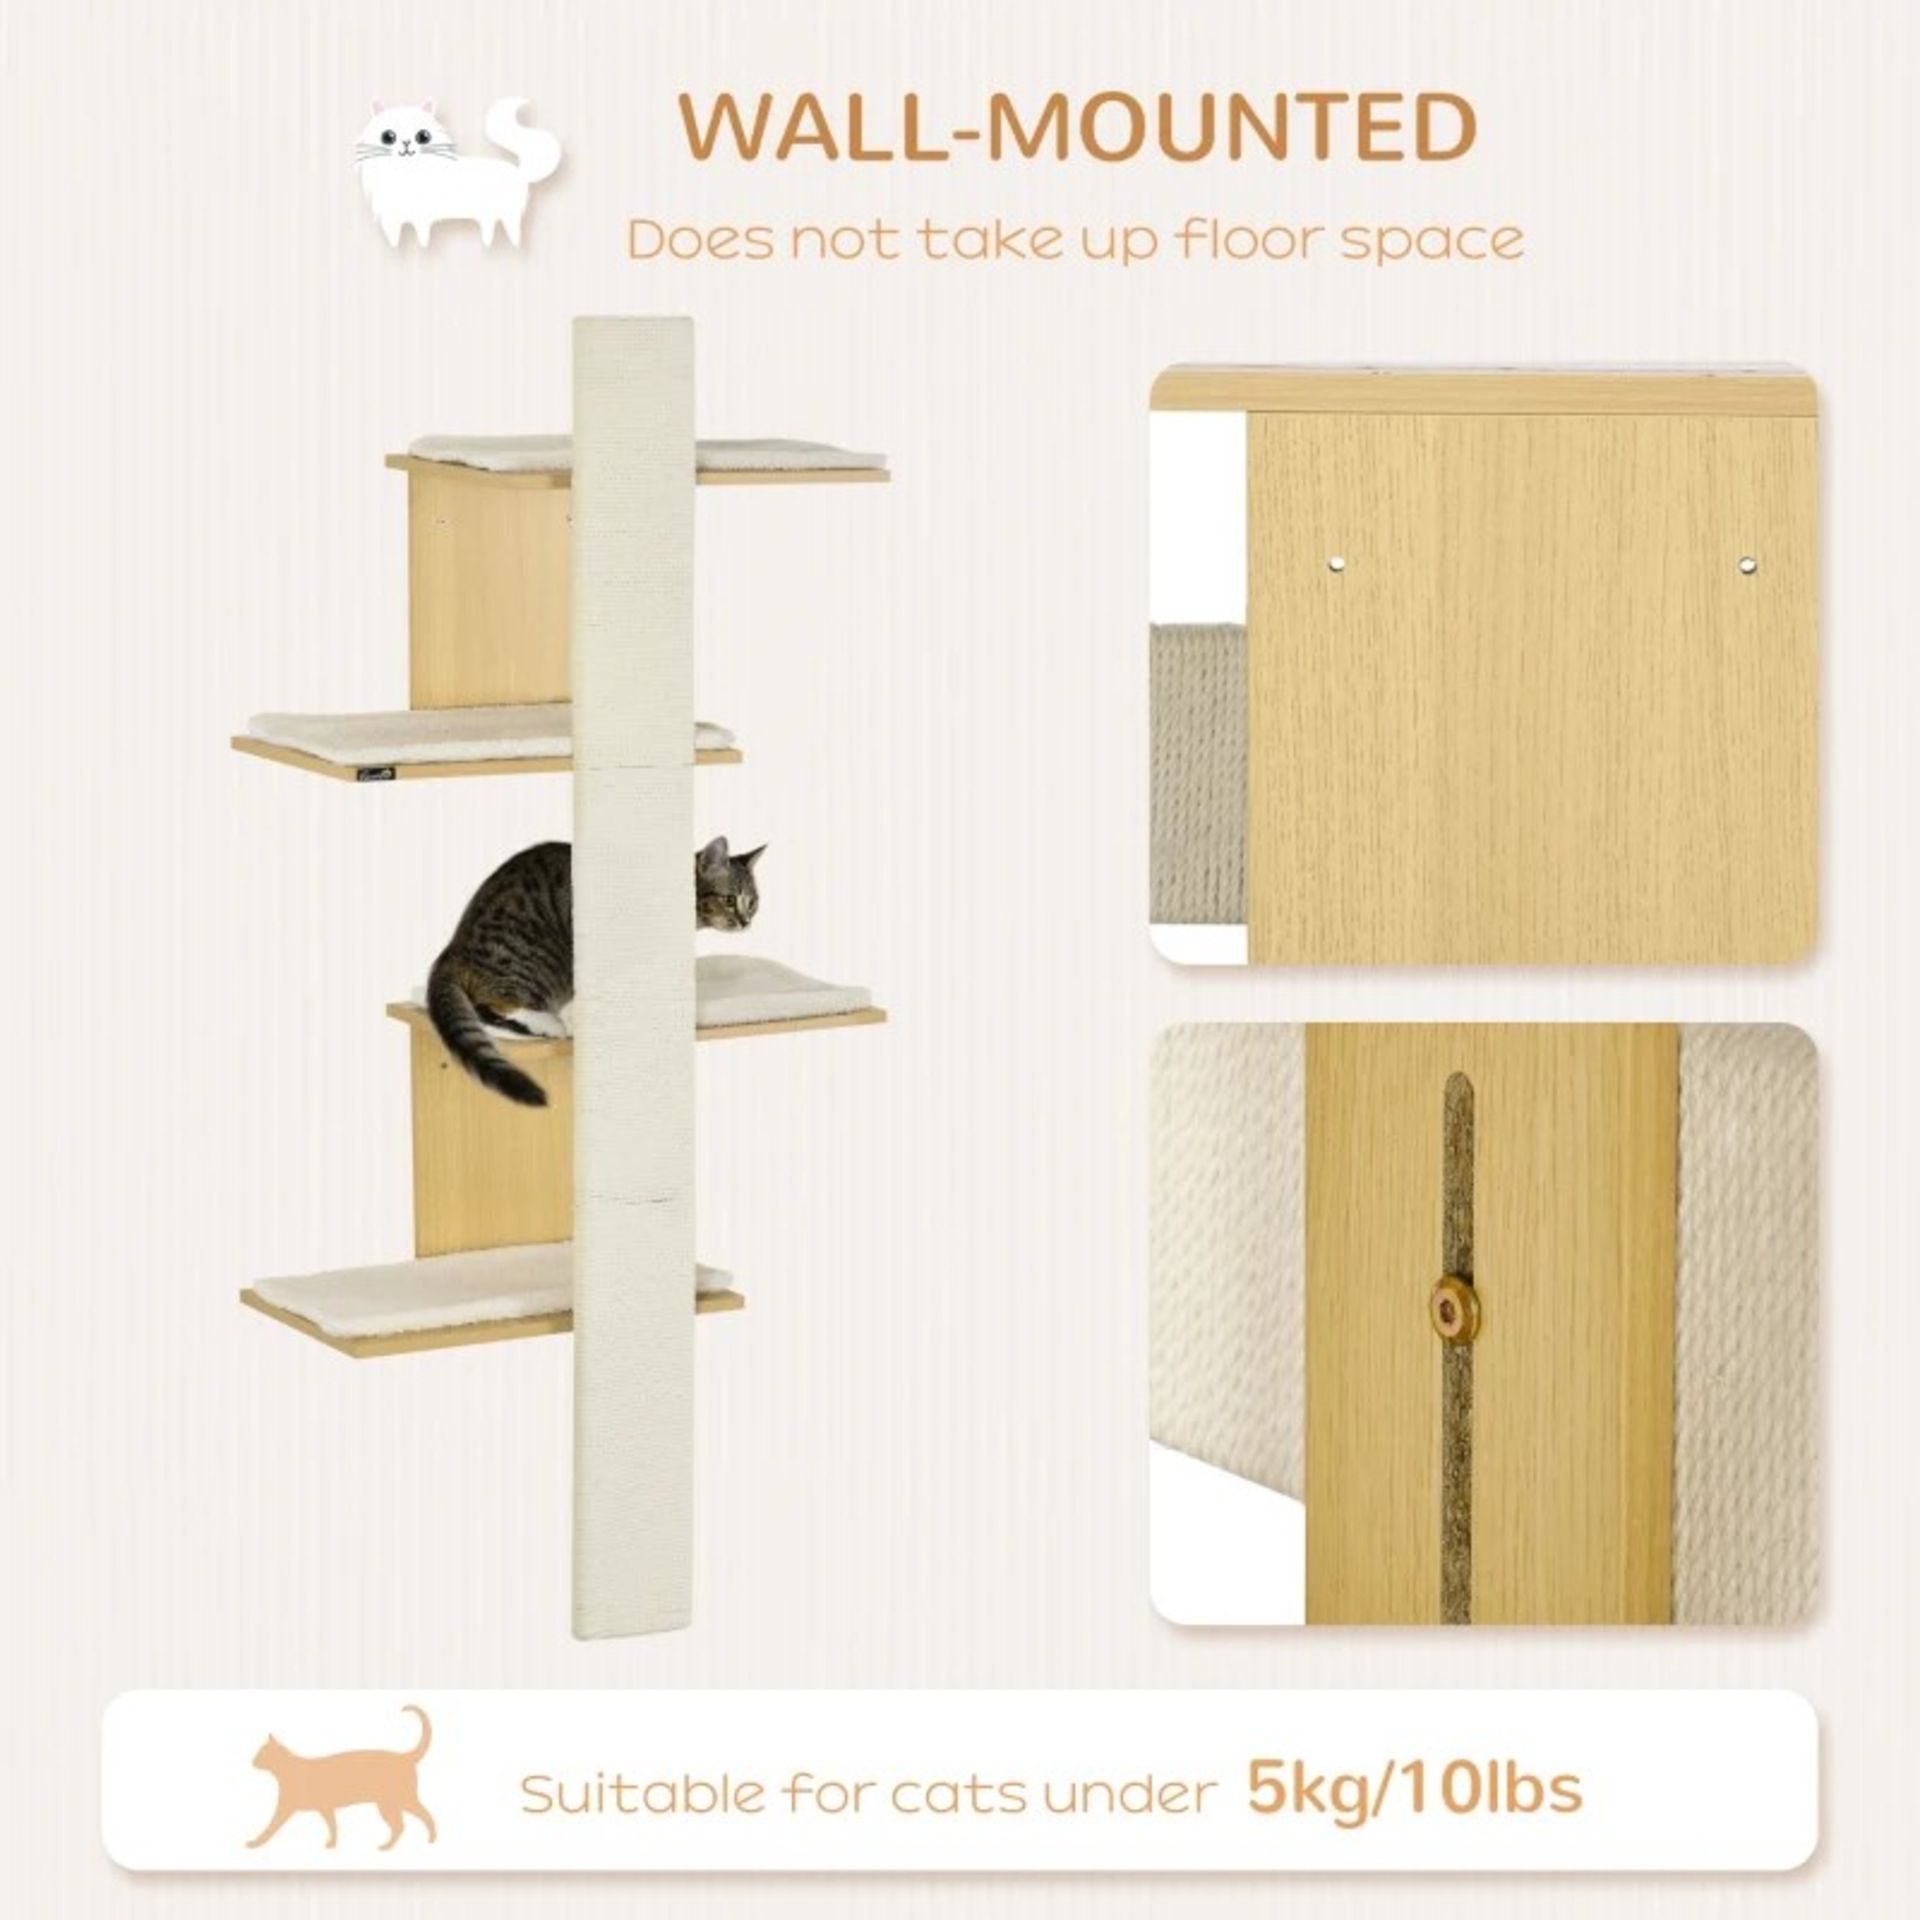 RRP £129.99 - PawHut Cat Tree for Indoor Cats, 4-Layer Wall-Mounted Shelf, Kitten Perch Climber - Image 3 of 4